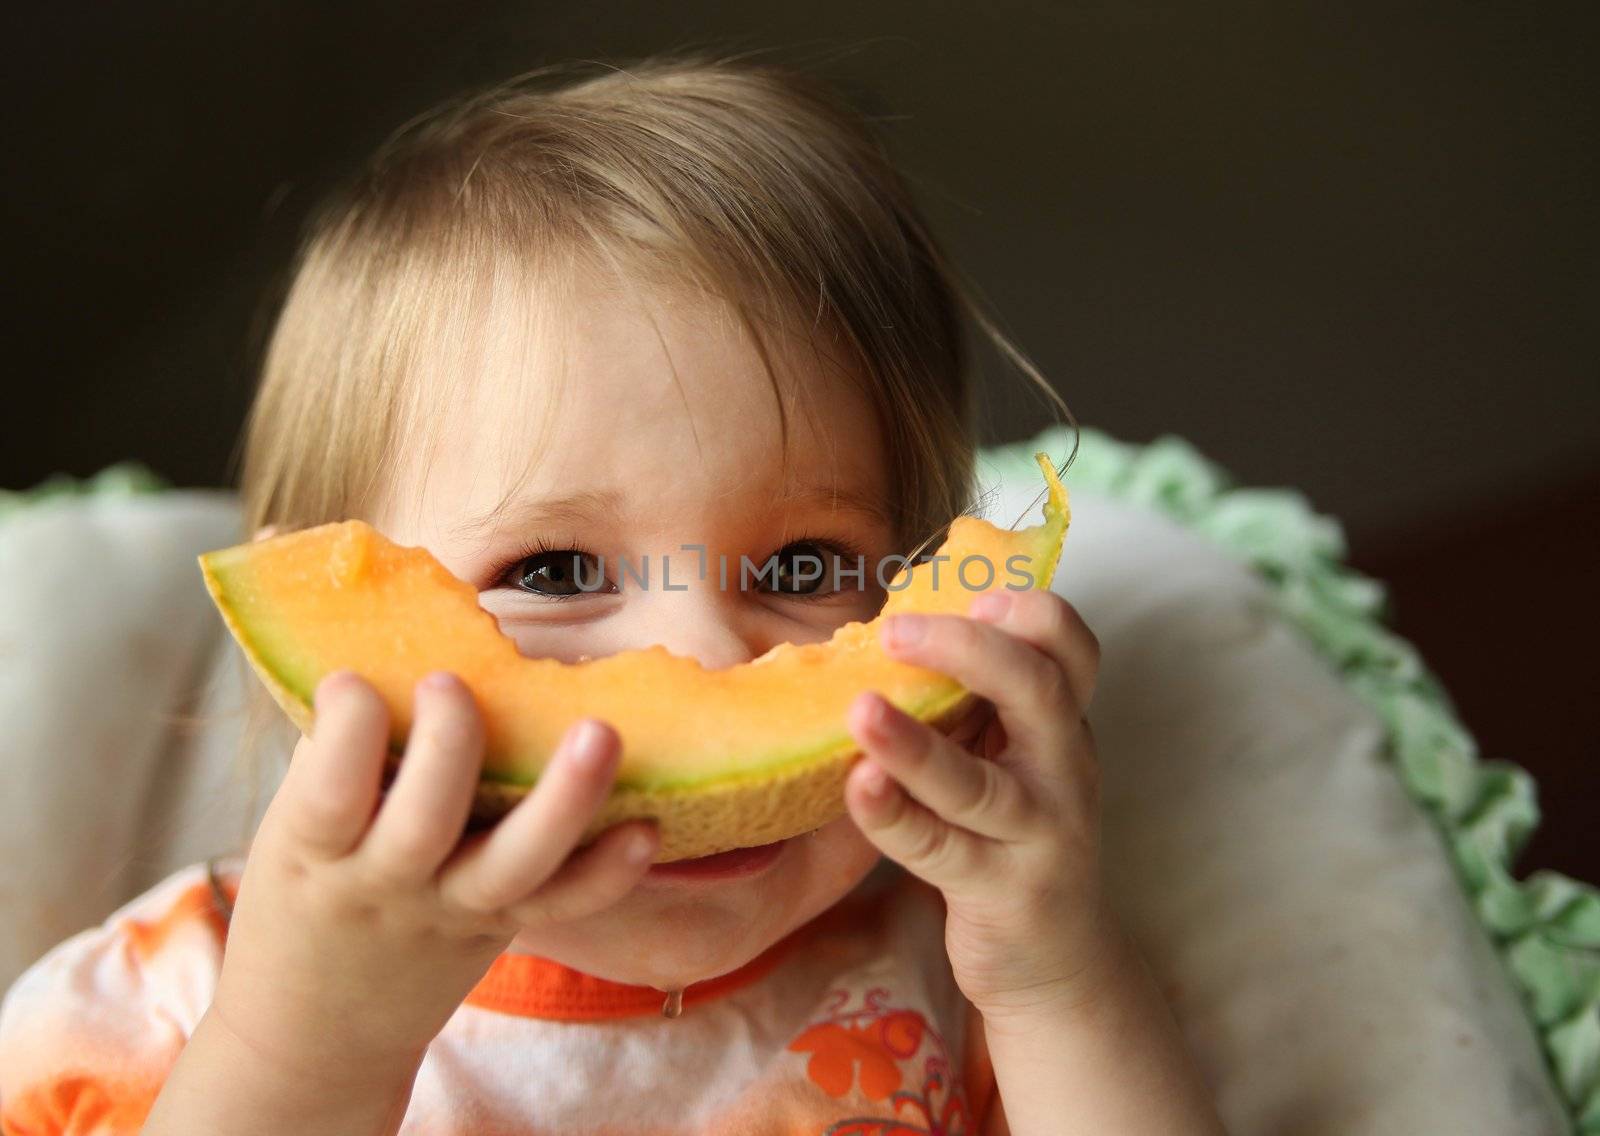 Baby eating fruit by teraberb